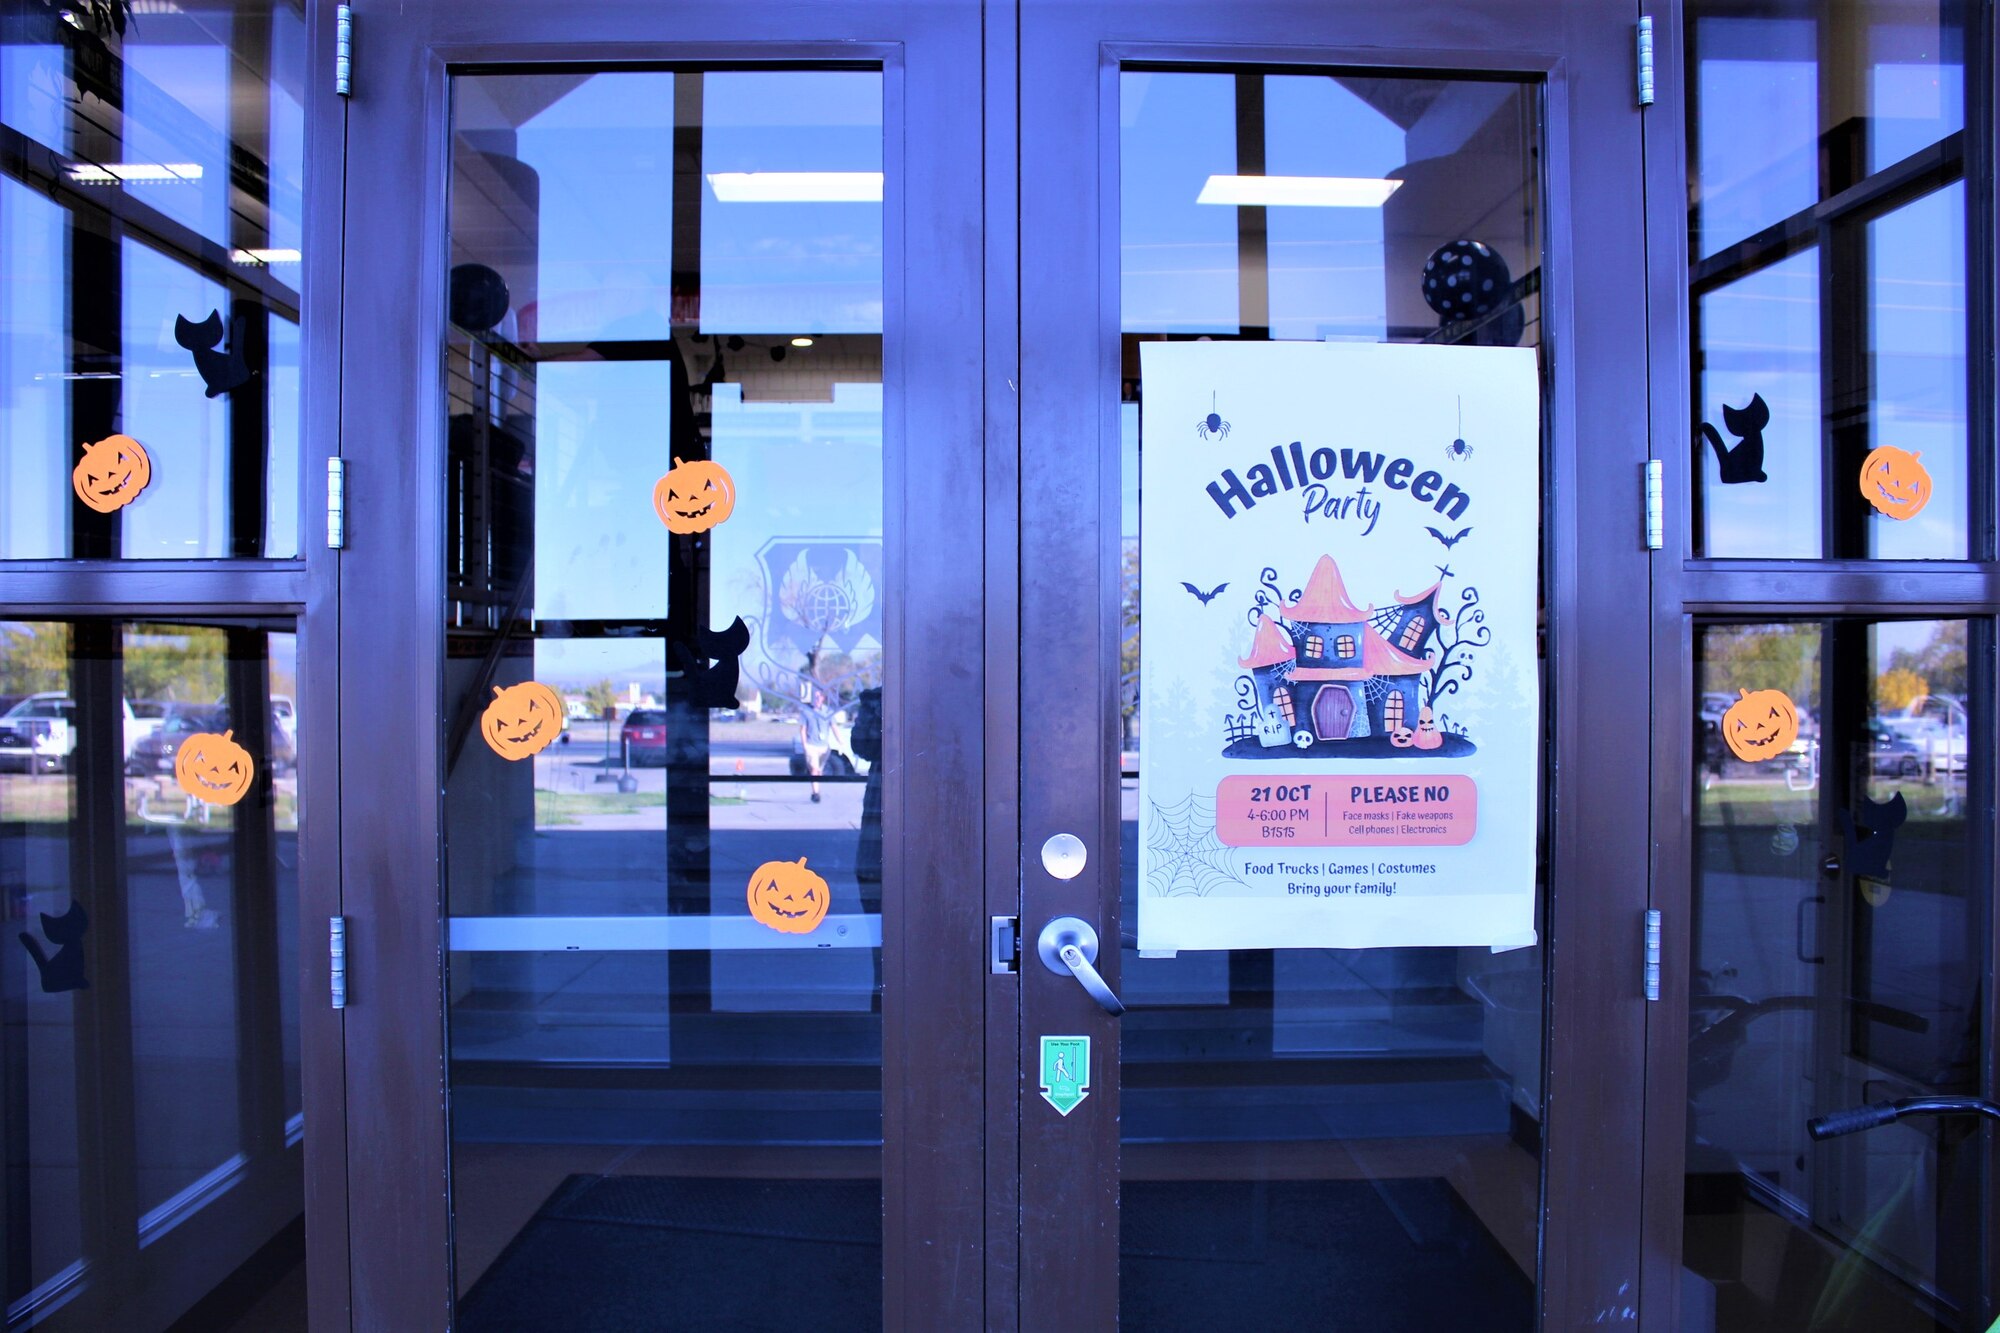 Glass Doors and a Halloween party sign